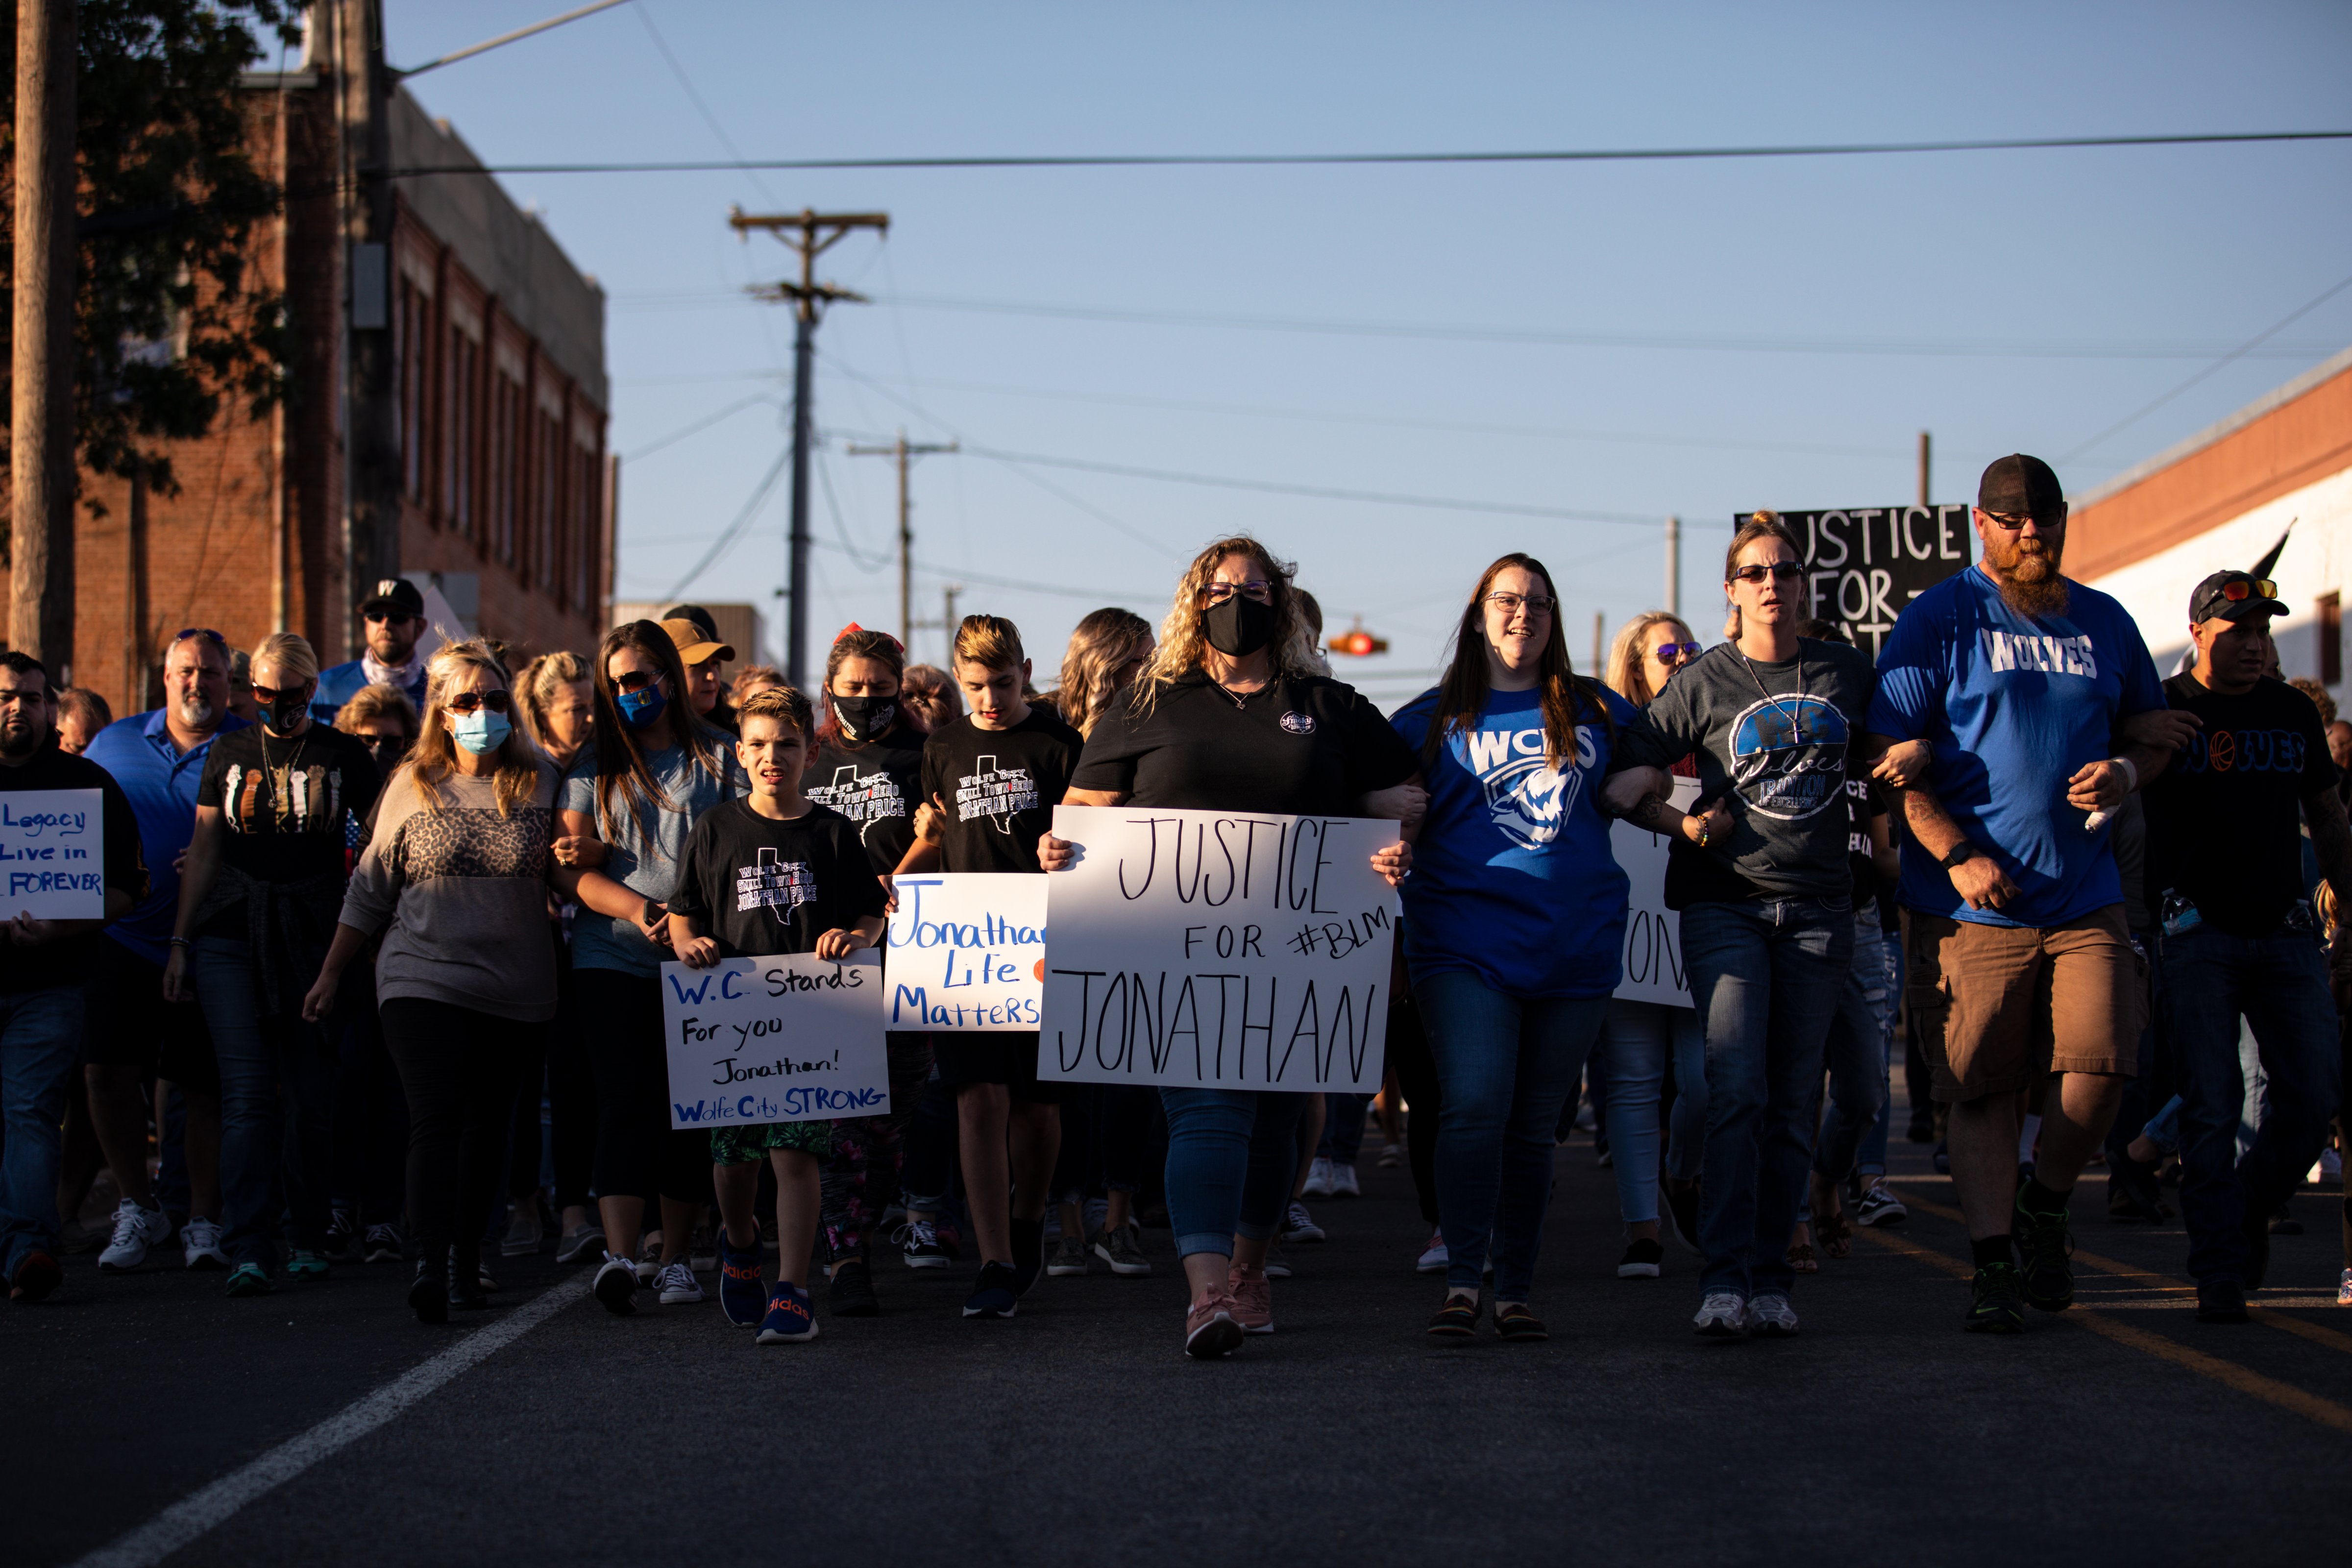 People gather for a march, rally and candle light vigil in honor Jonathan Price on Oct. 5, 2020 in Wolfe City, Texas. (Montinique Monroe—Getty Images)